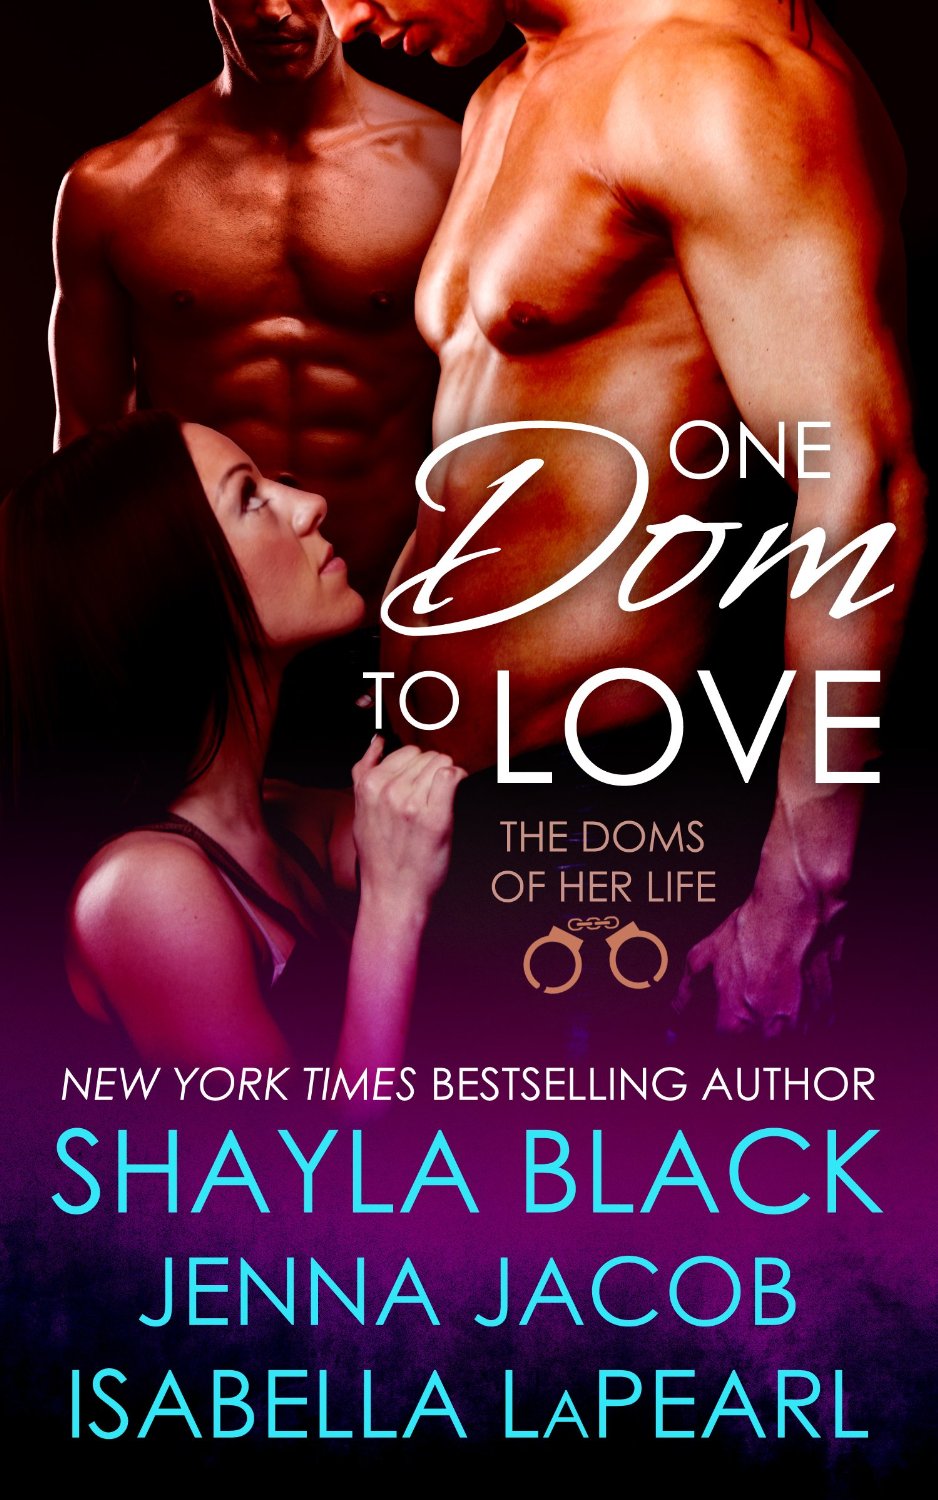 One Dom to Love by Shayla Black, Jenna Jacob & Isabella LaPearl